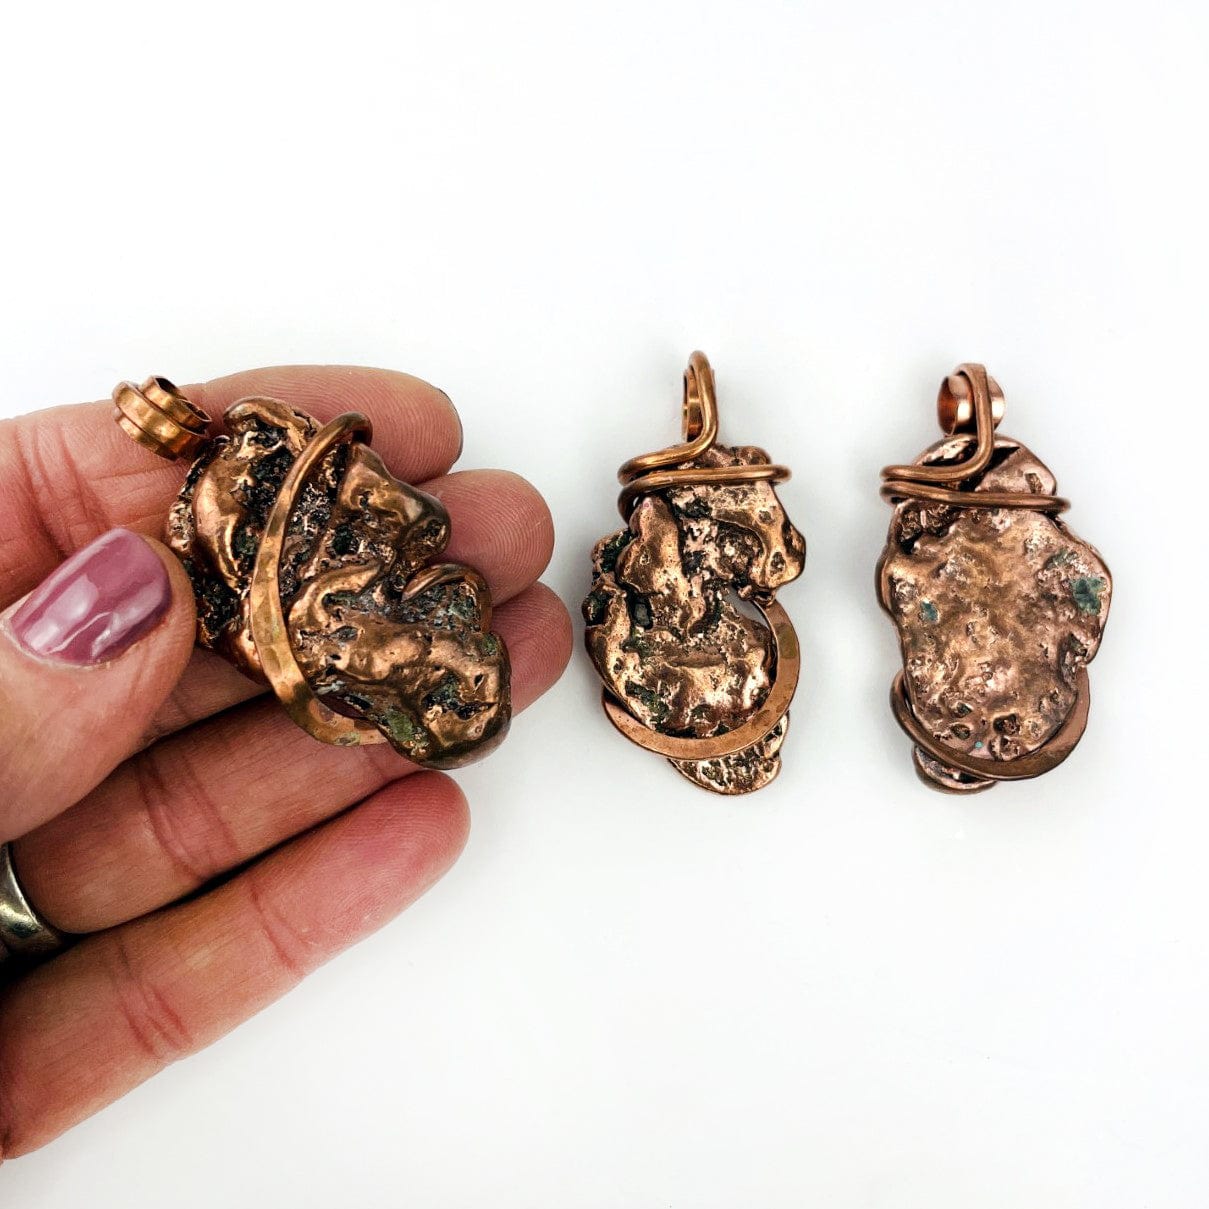 3 Copper Nugget freeform pendants with one in a hand for size reference